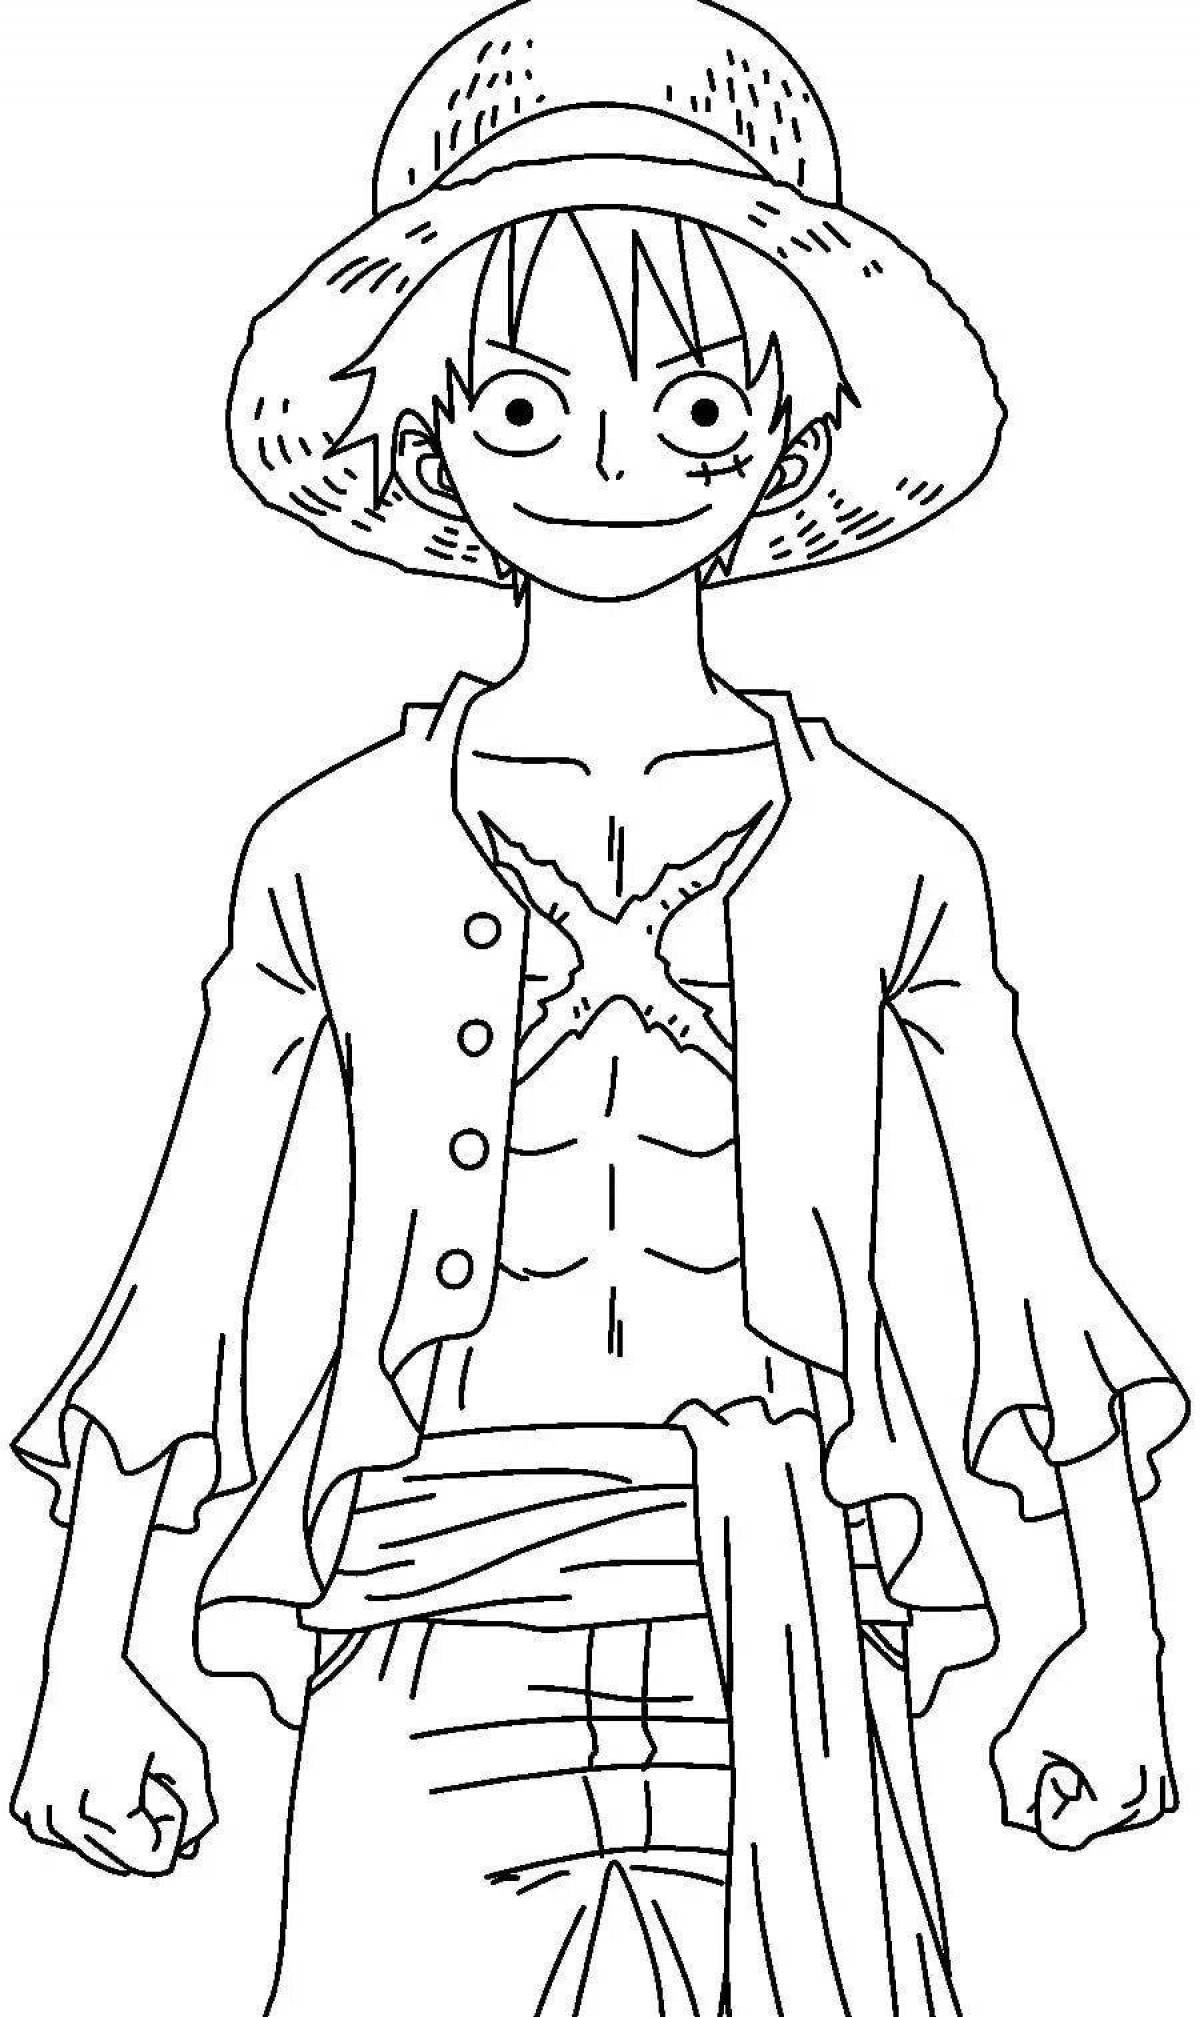 Luffy one piece coloring book